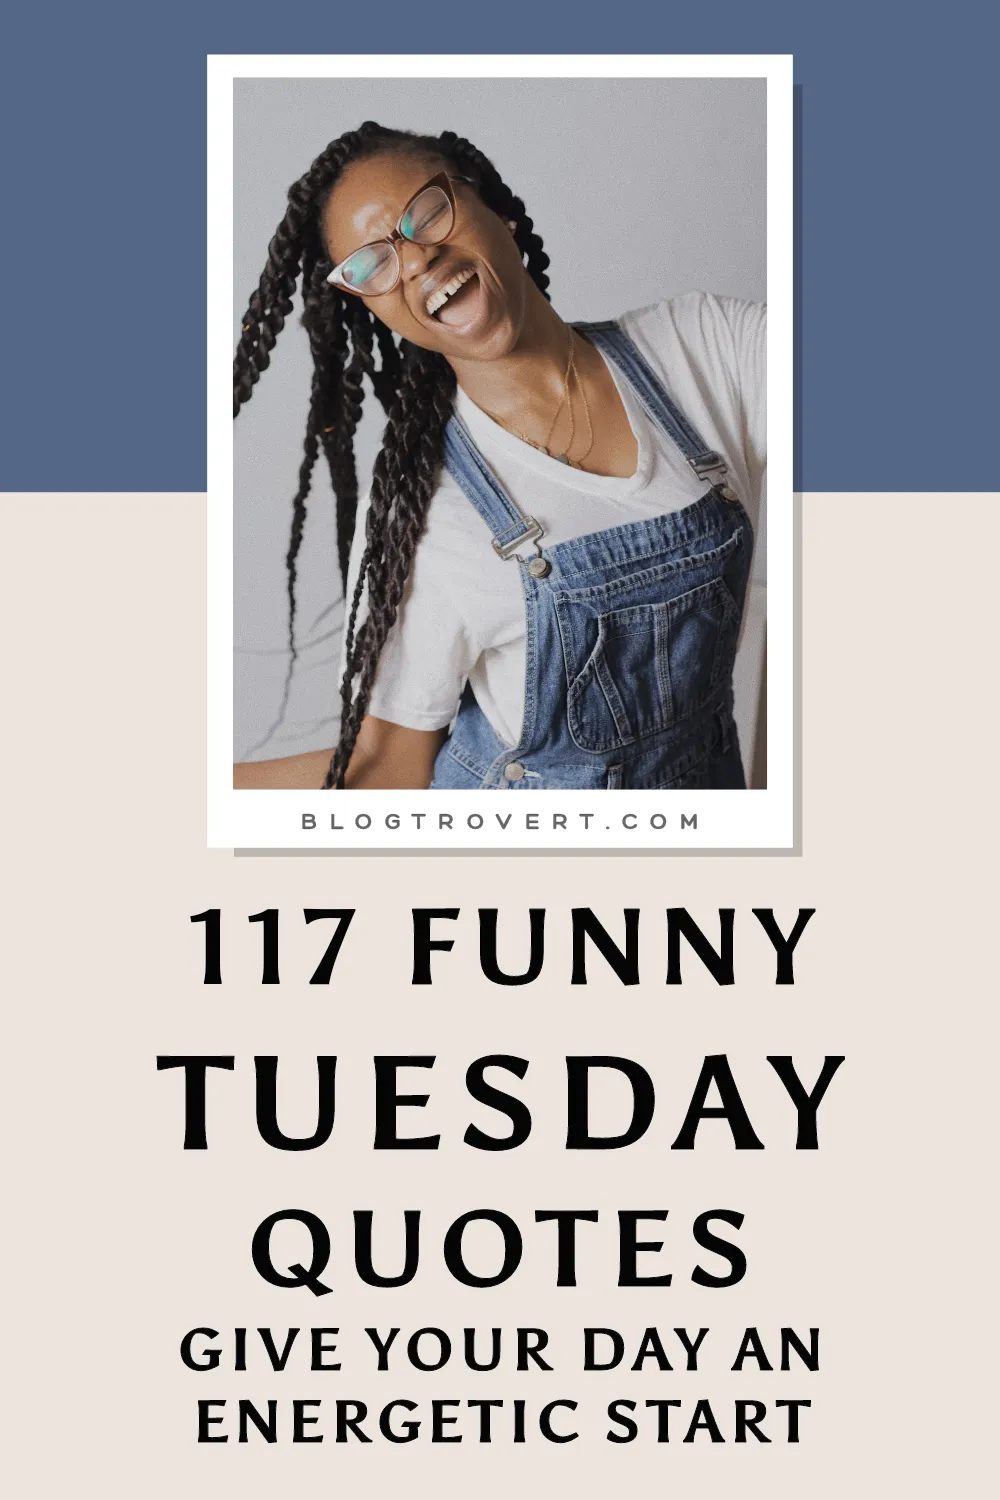 117 Funny Tuesday Quotes to Brighten Your Day 1